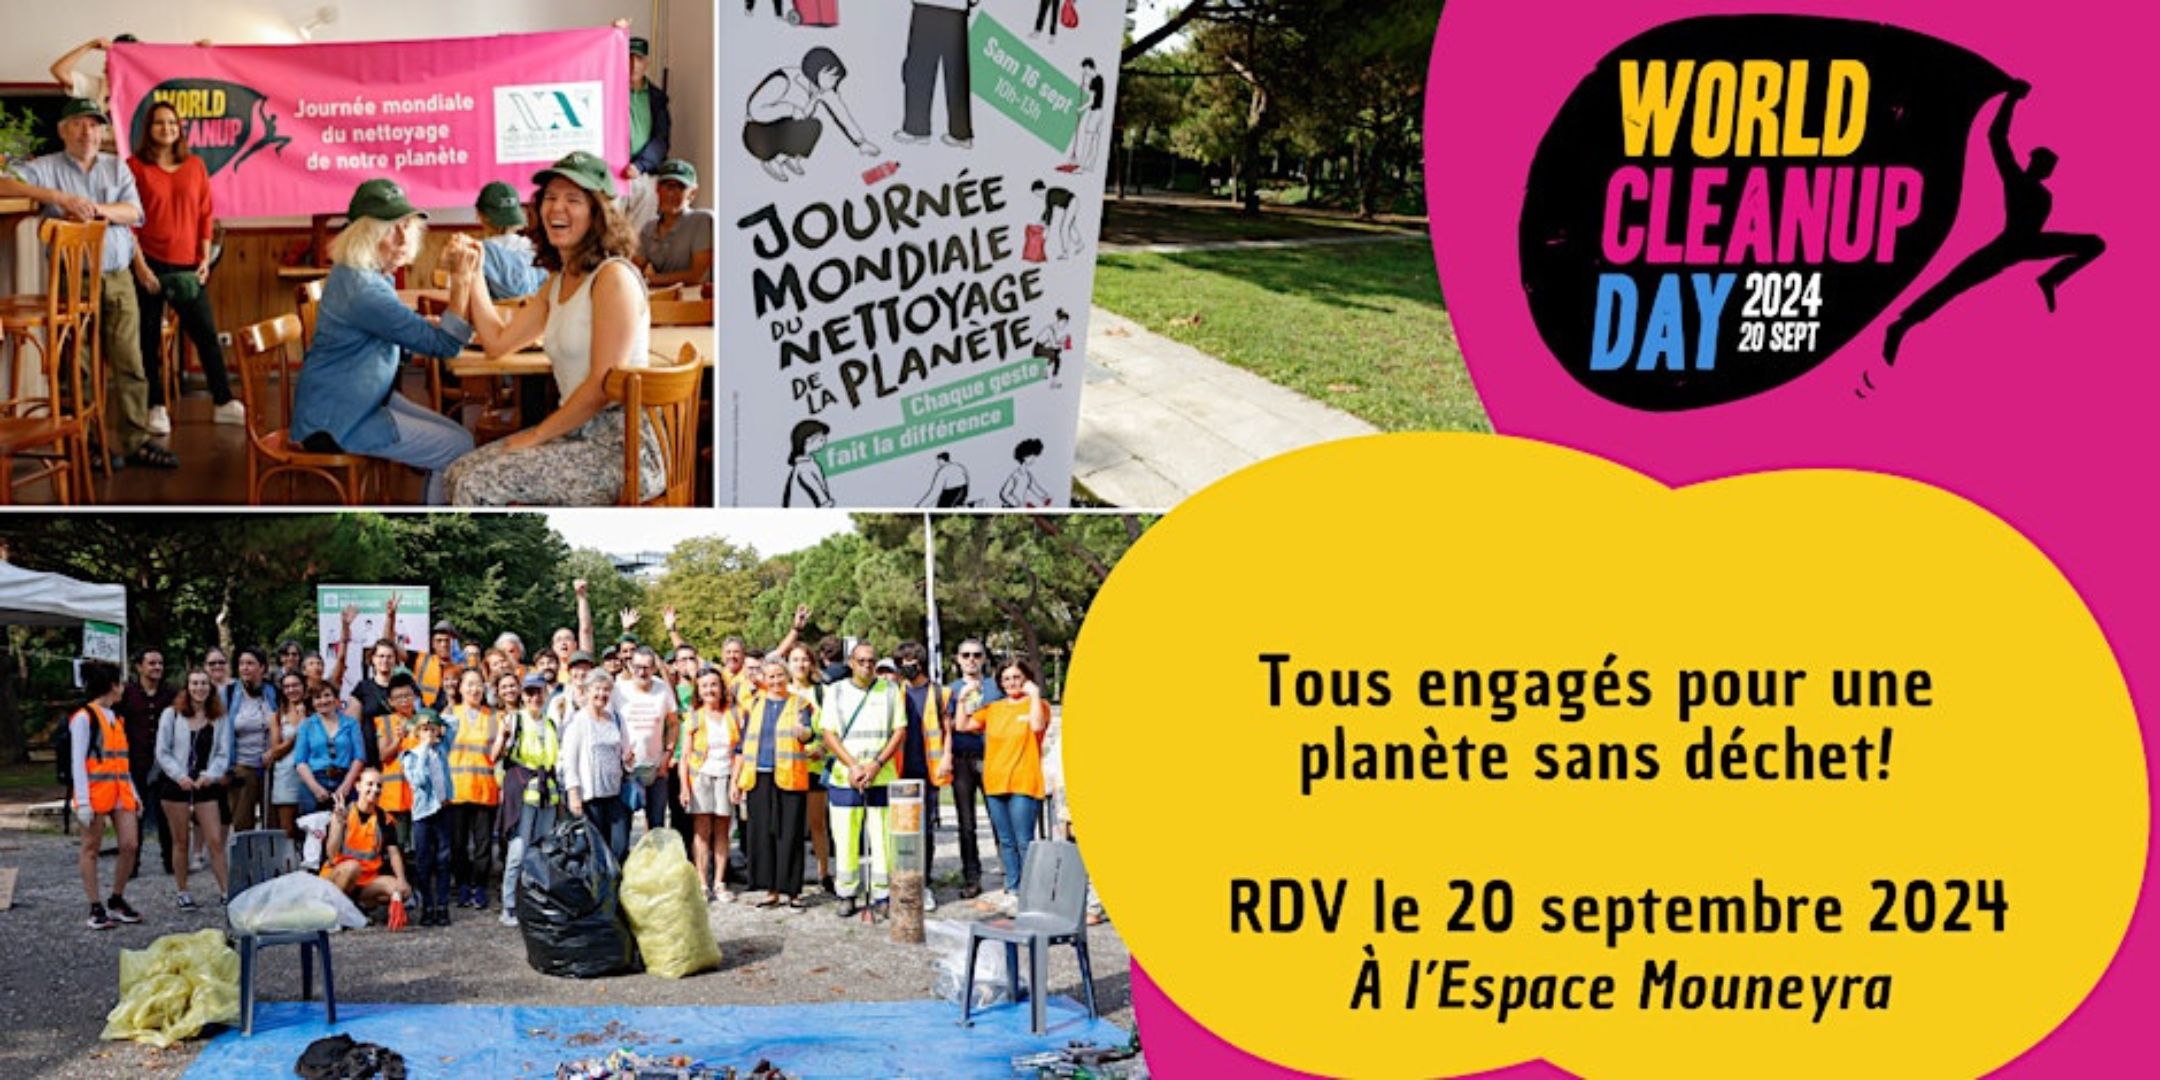 World Cleanup Day 2024 - Bordeaux